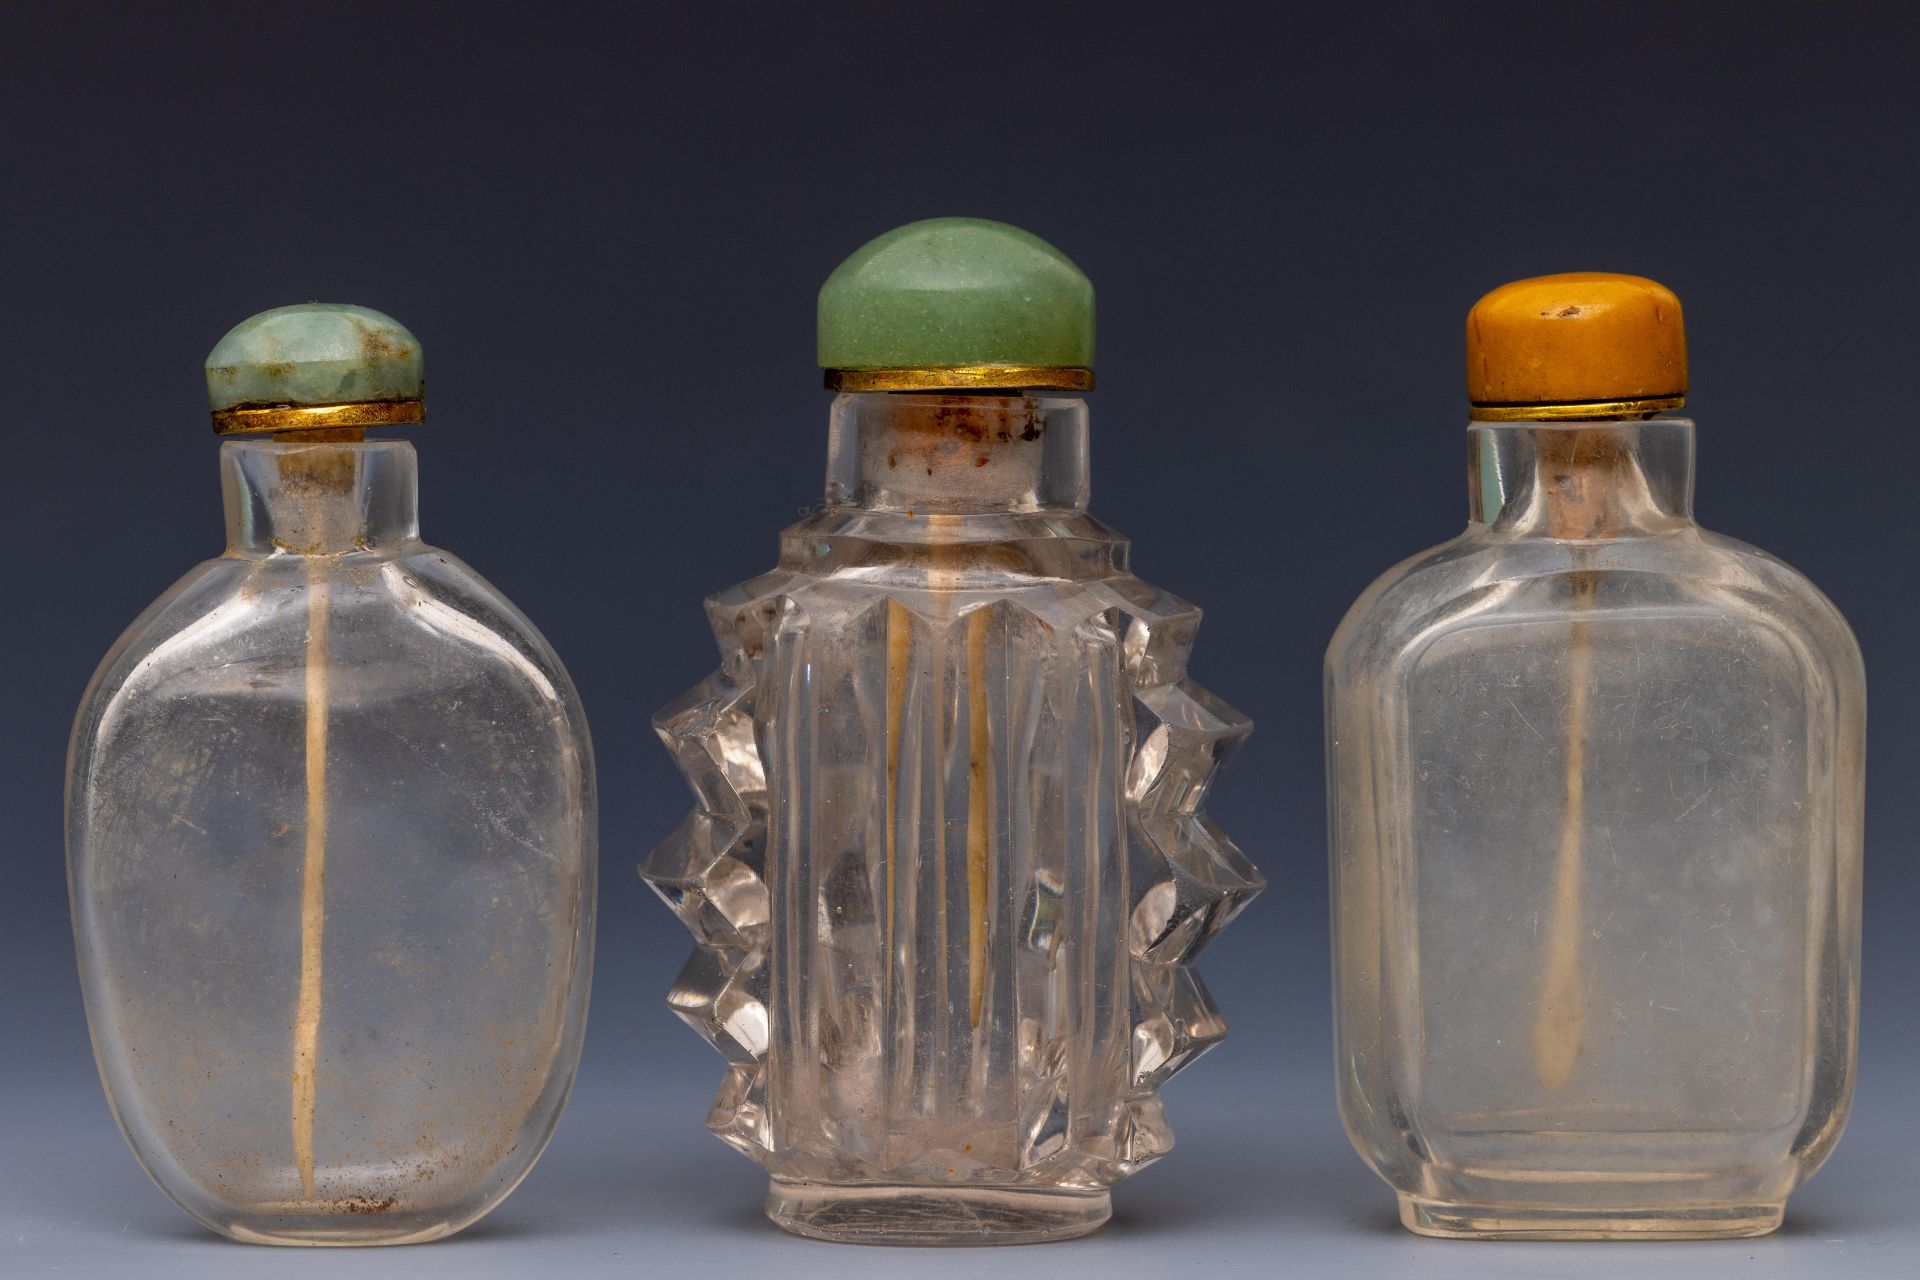 China, three translucent glass snuff bottles and stoppers, late Qing dynasty (1644-1912),